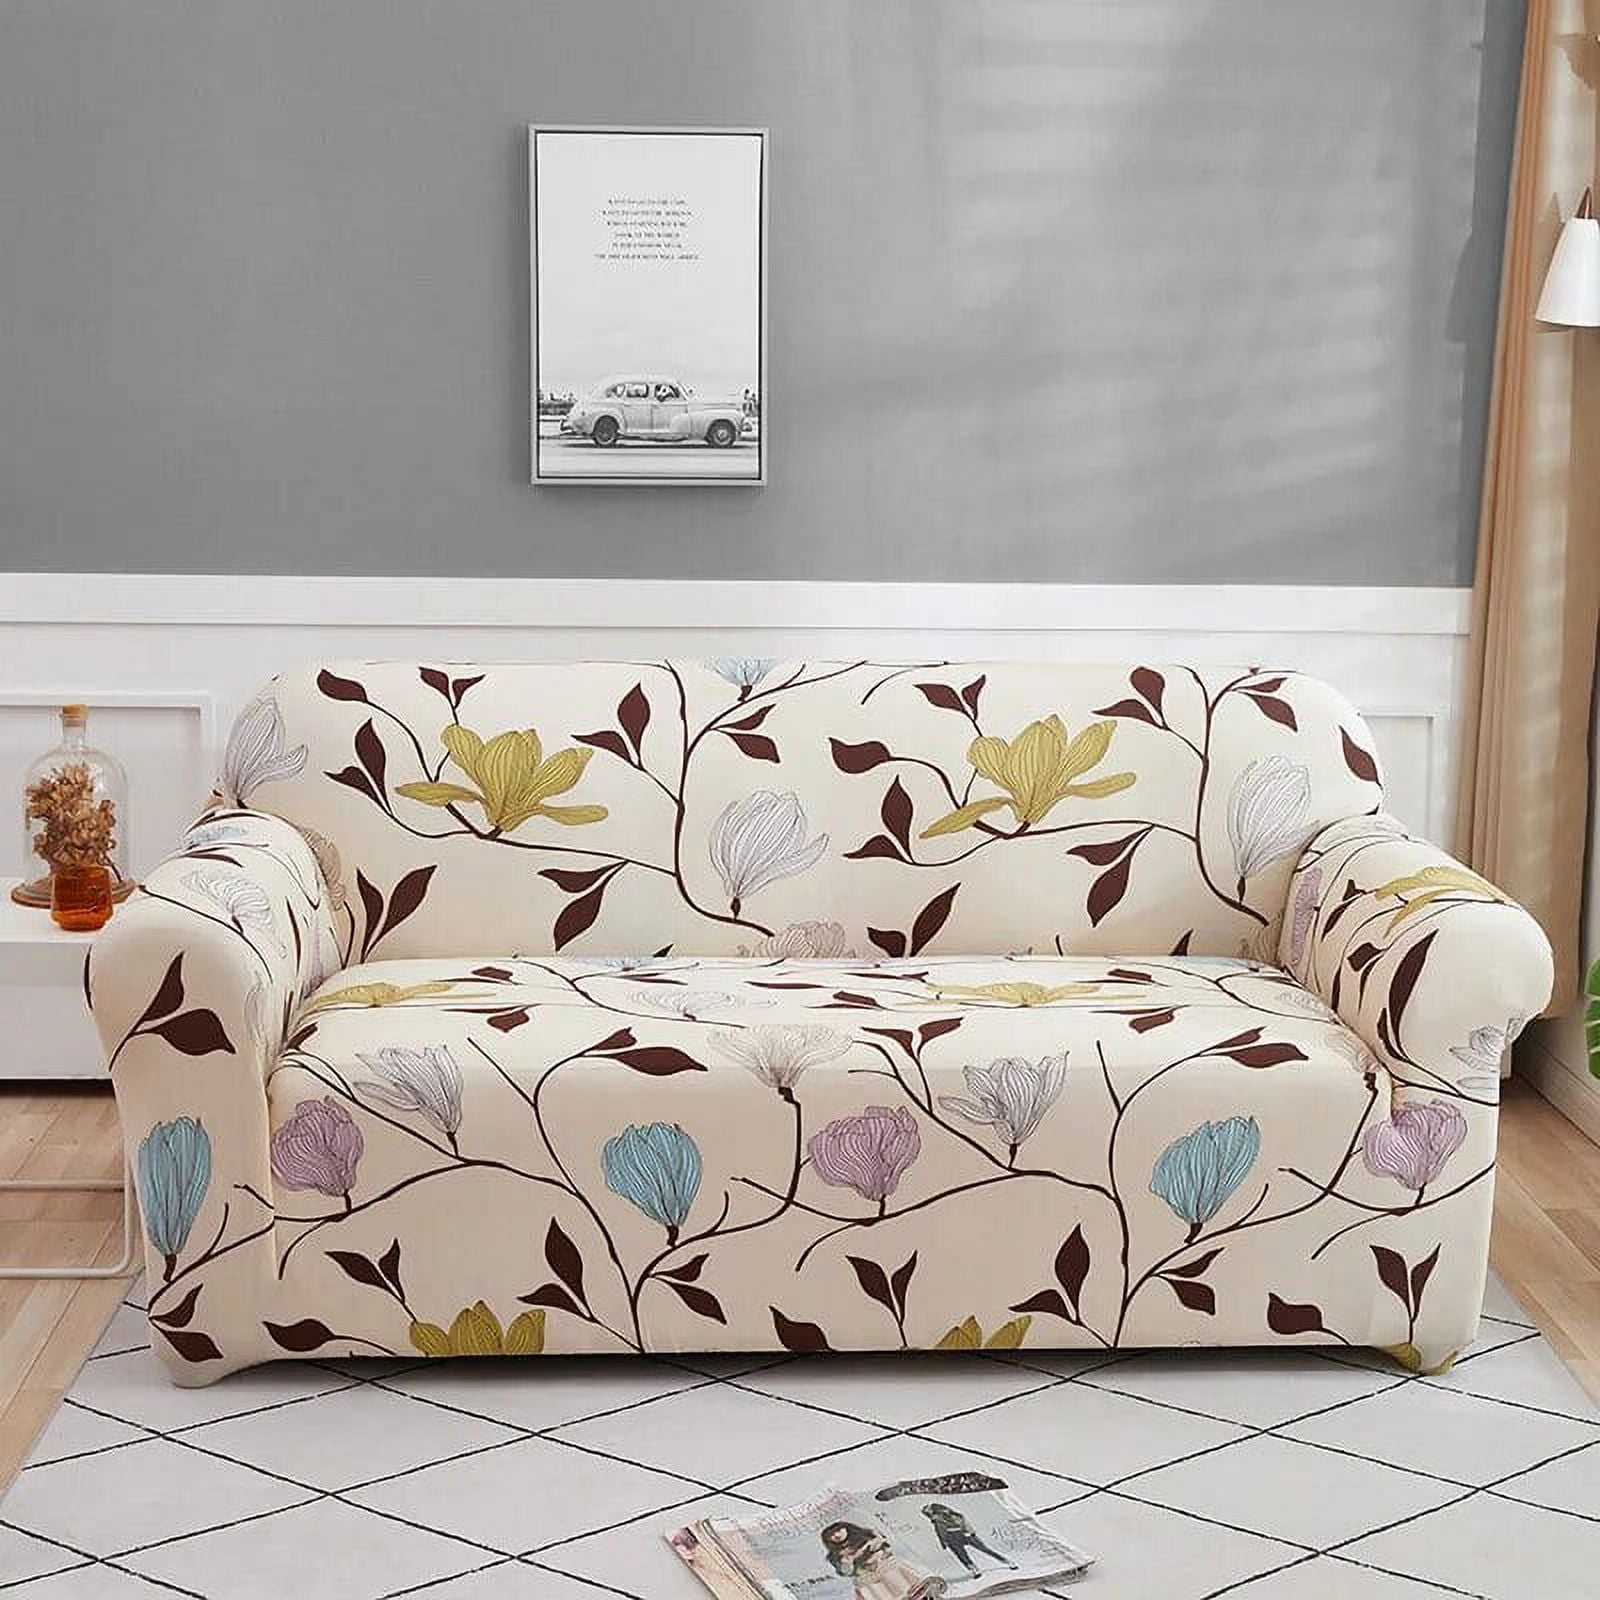 Christmas Elastic Sofa Covers for Living Room Floral Printed Couch ...